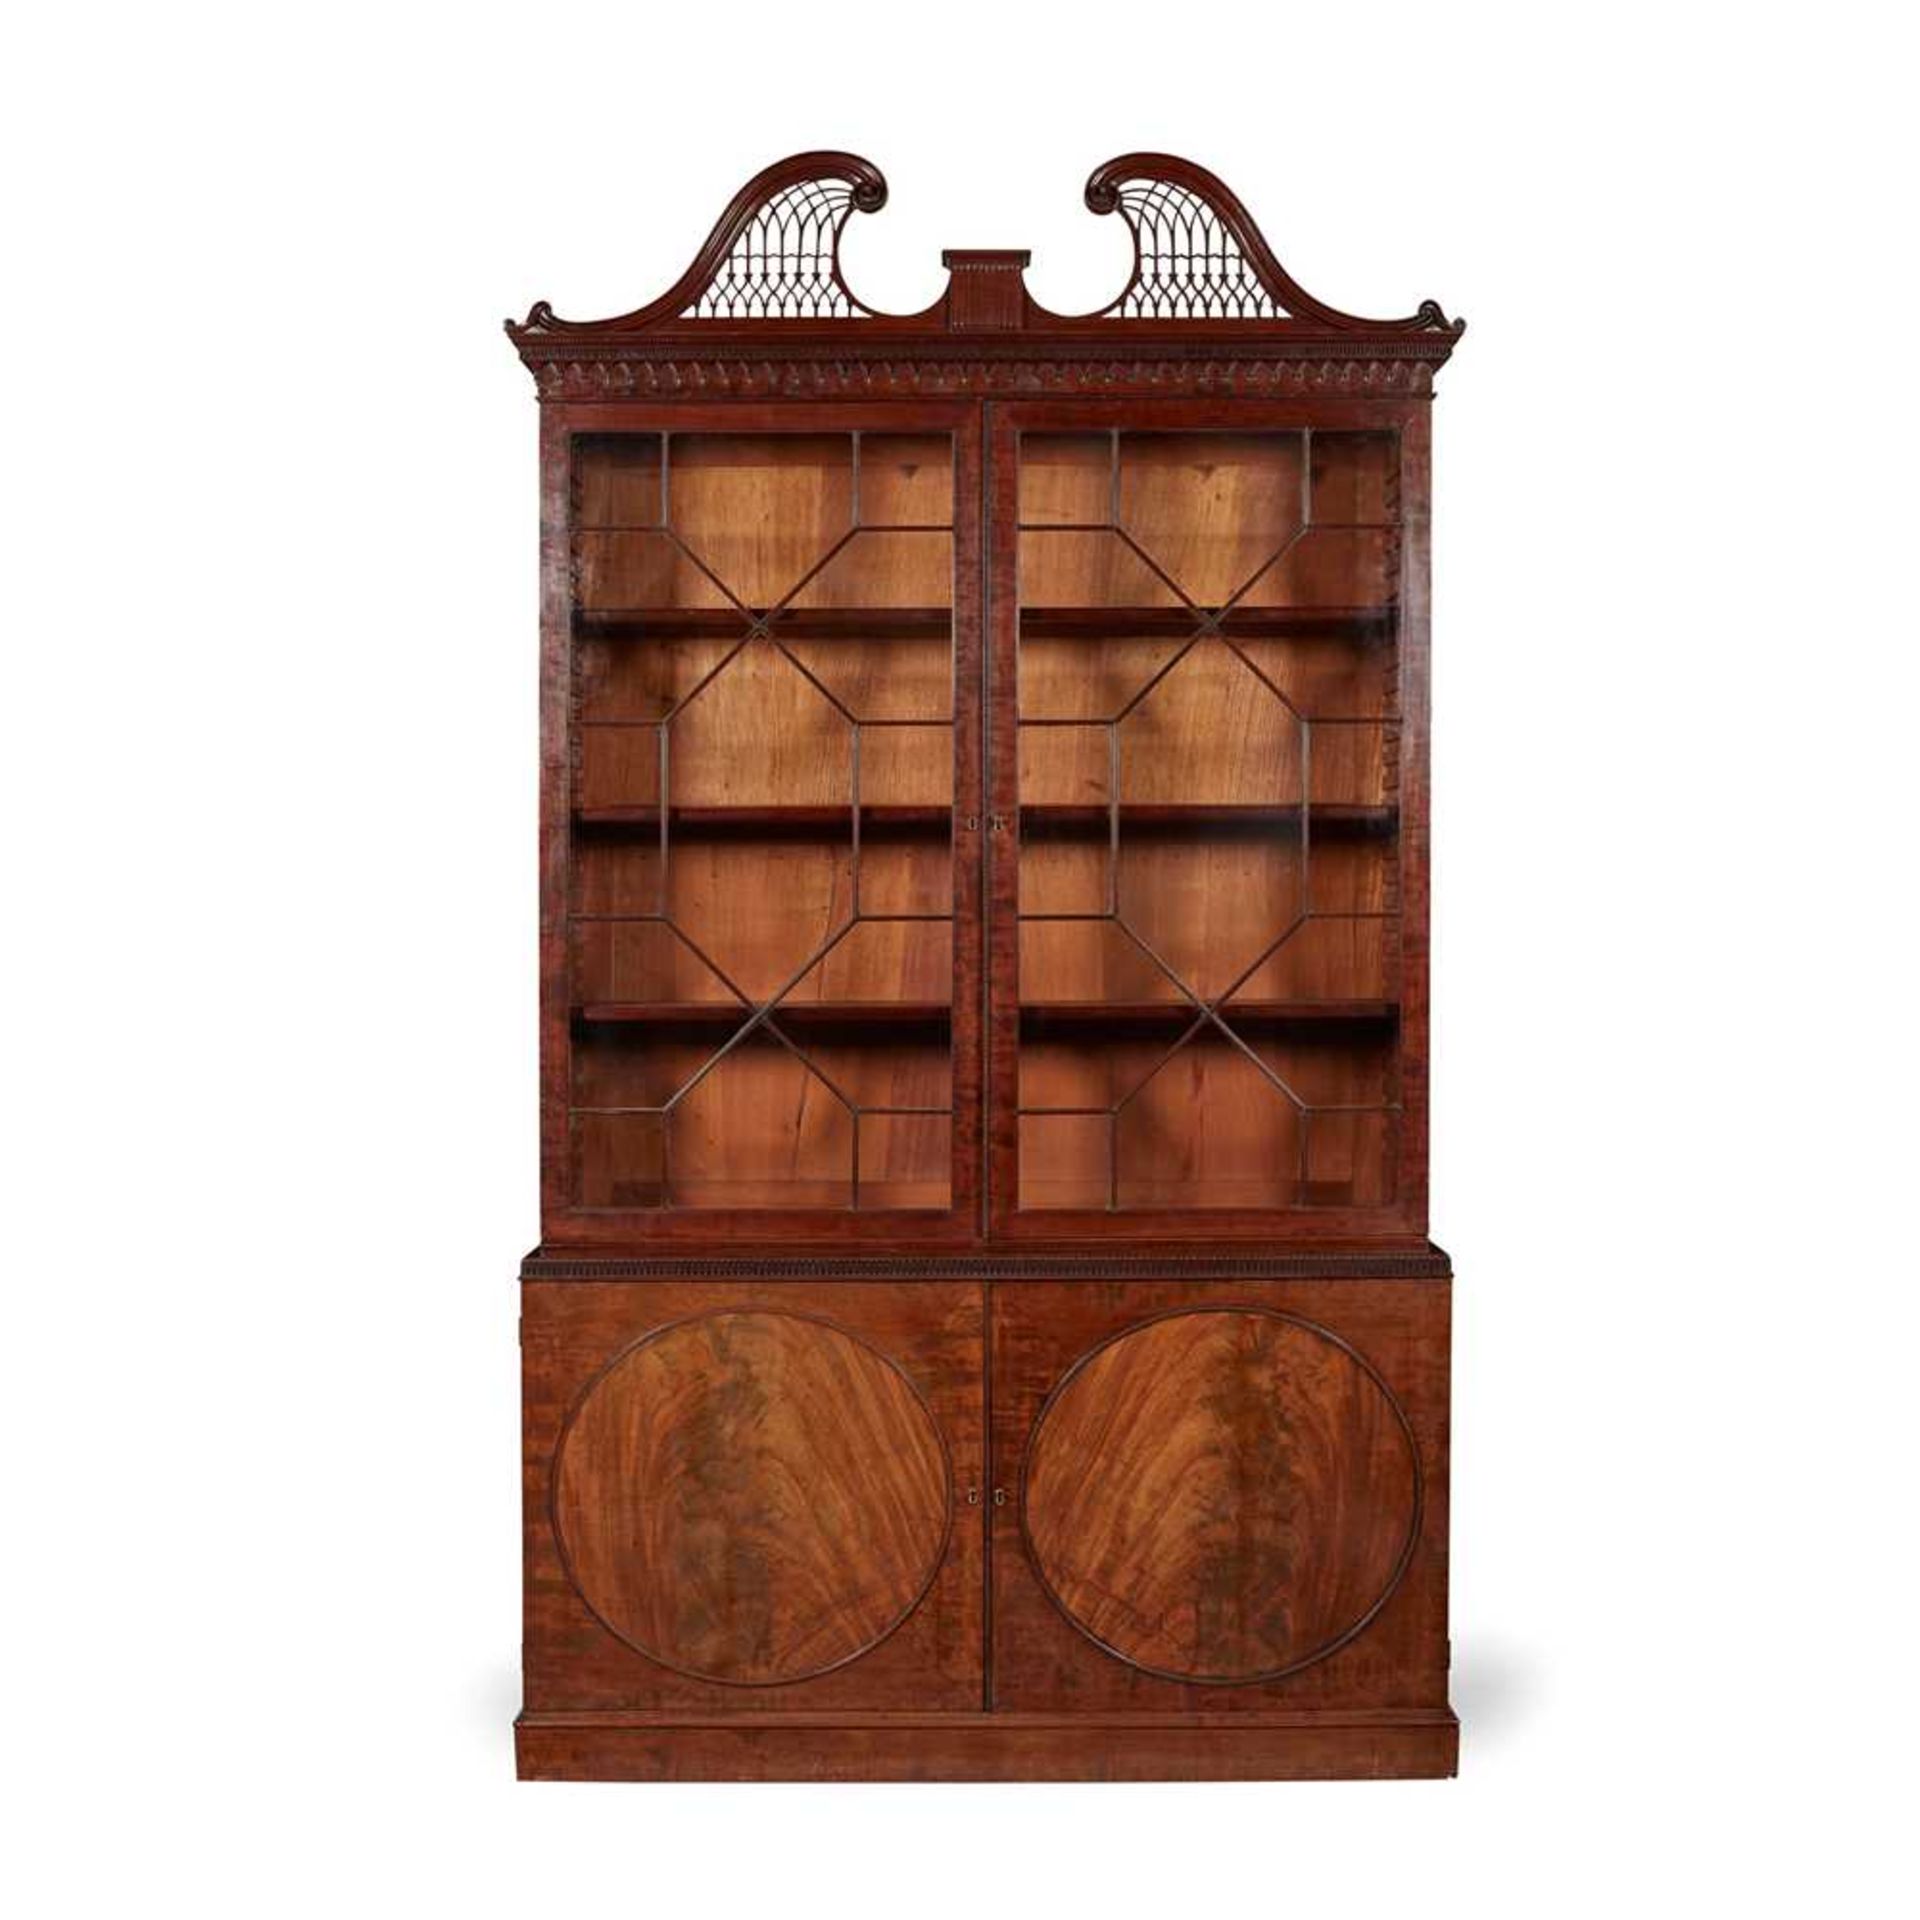 SCOTTISH GEORGE III MAHOGANY BOOKCASE CABINET, ATTRIBUTED TO THE WORKSHOP OF FRANCIS AND WILLIAM BRO